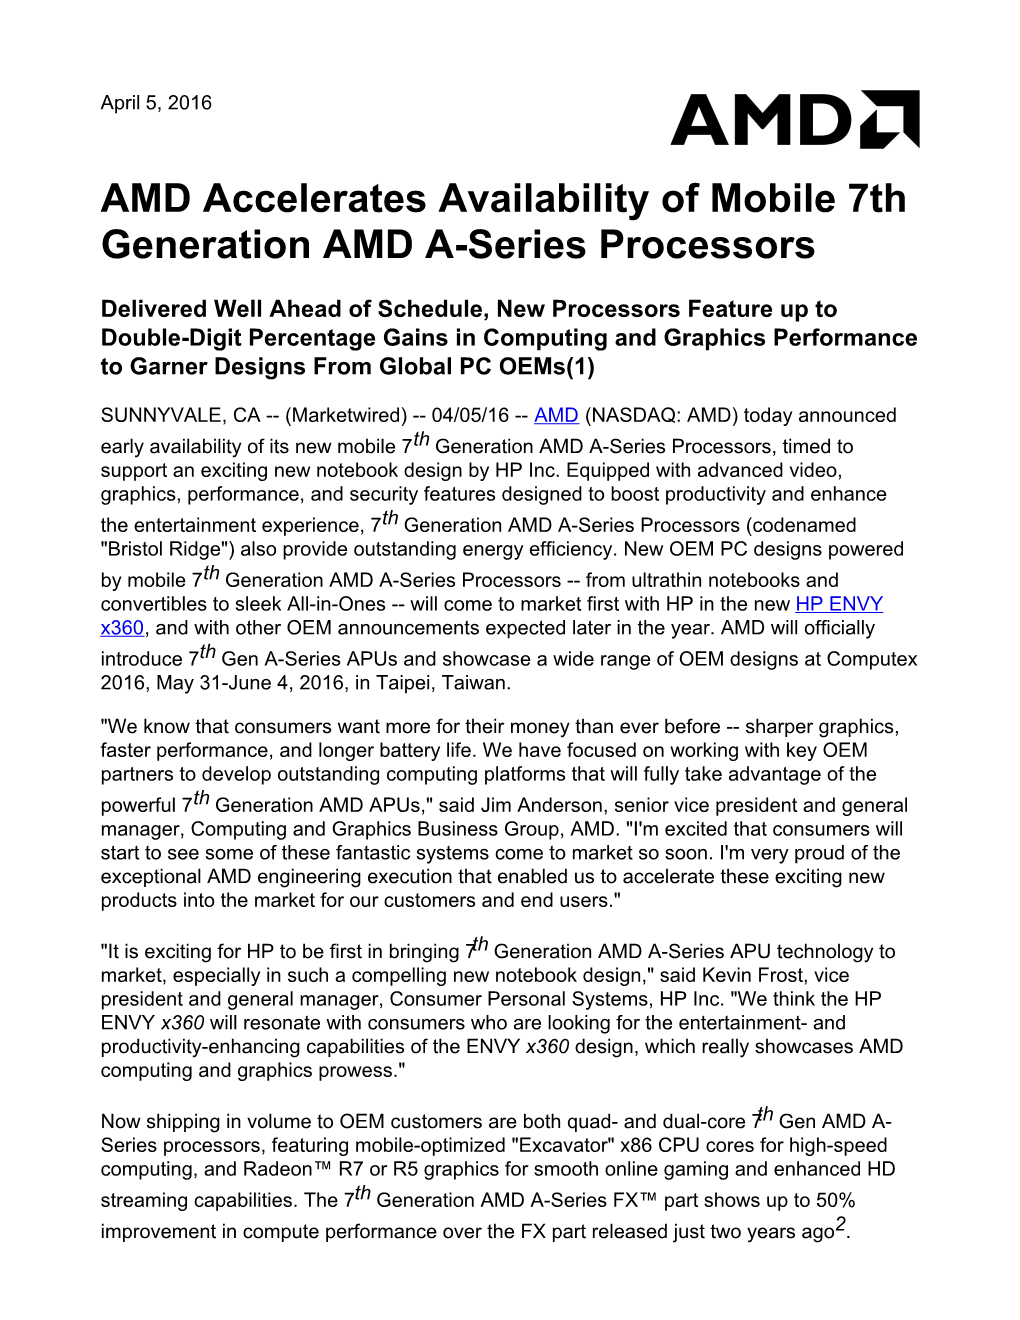 AMD Accelerates Availability of Mobile 7Th Generation AMD A-Series Processors